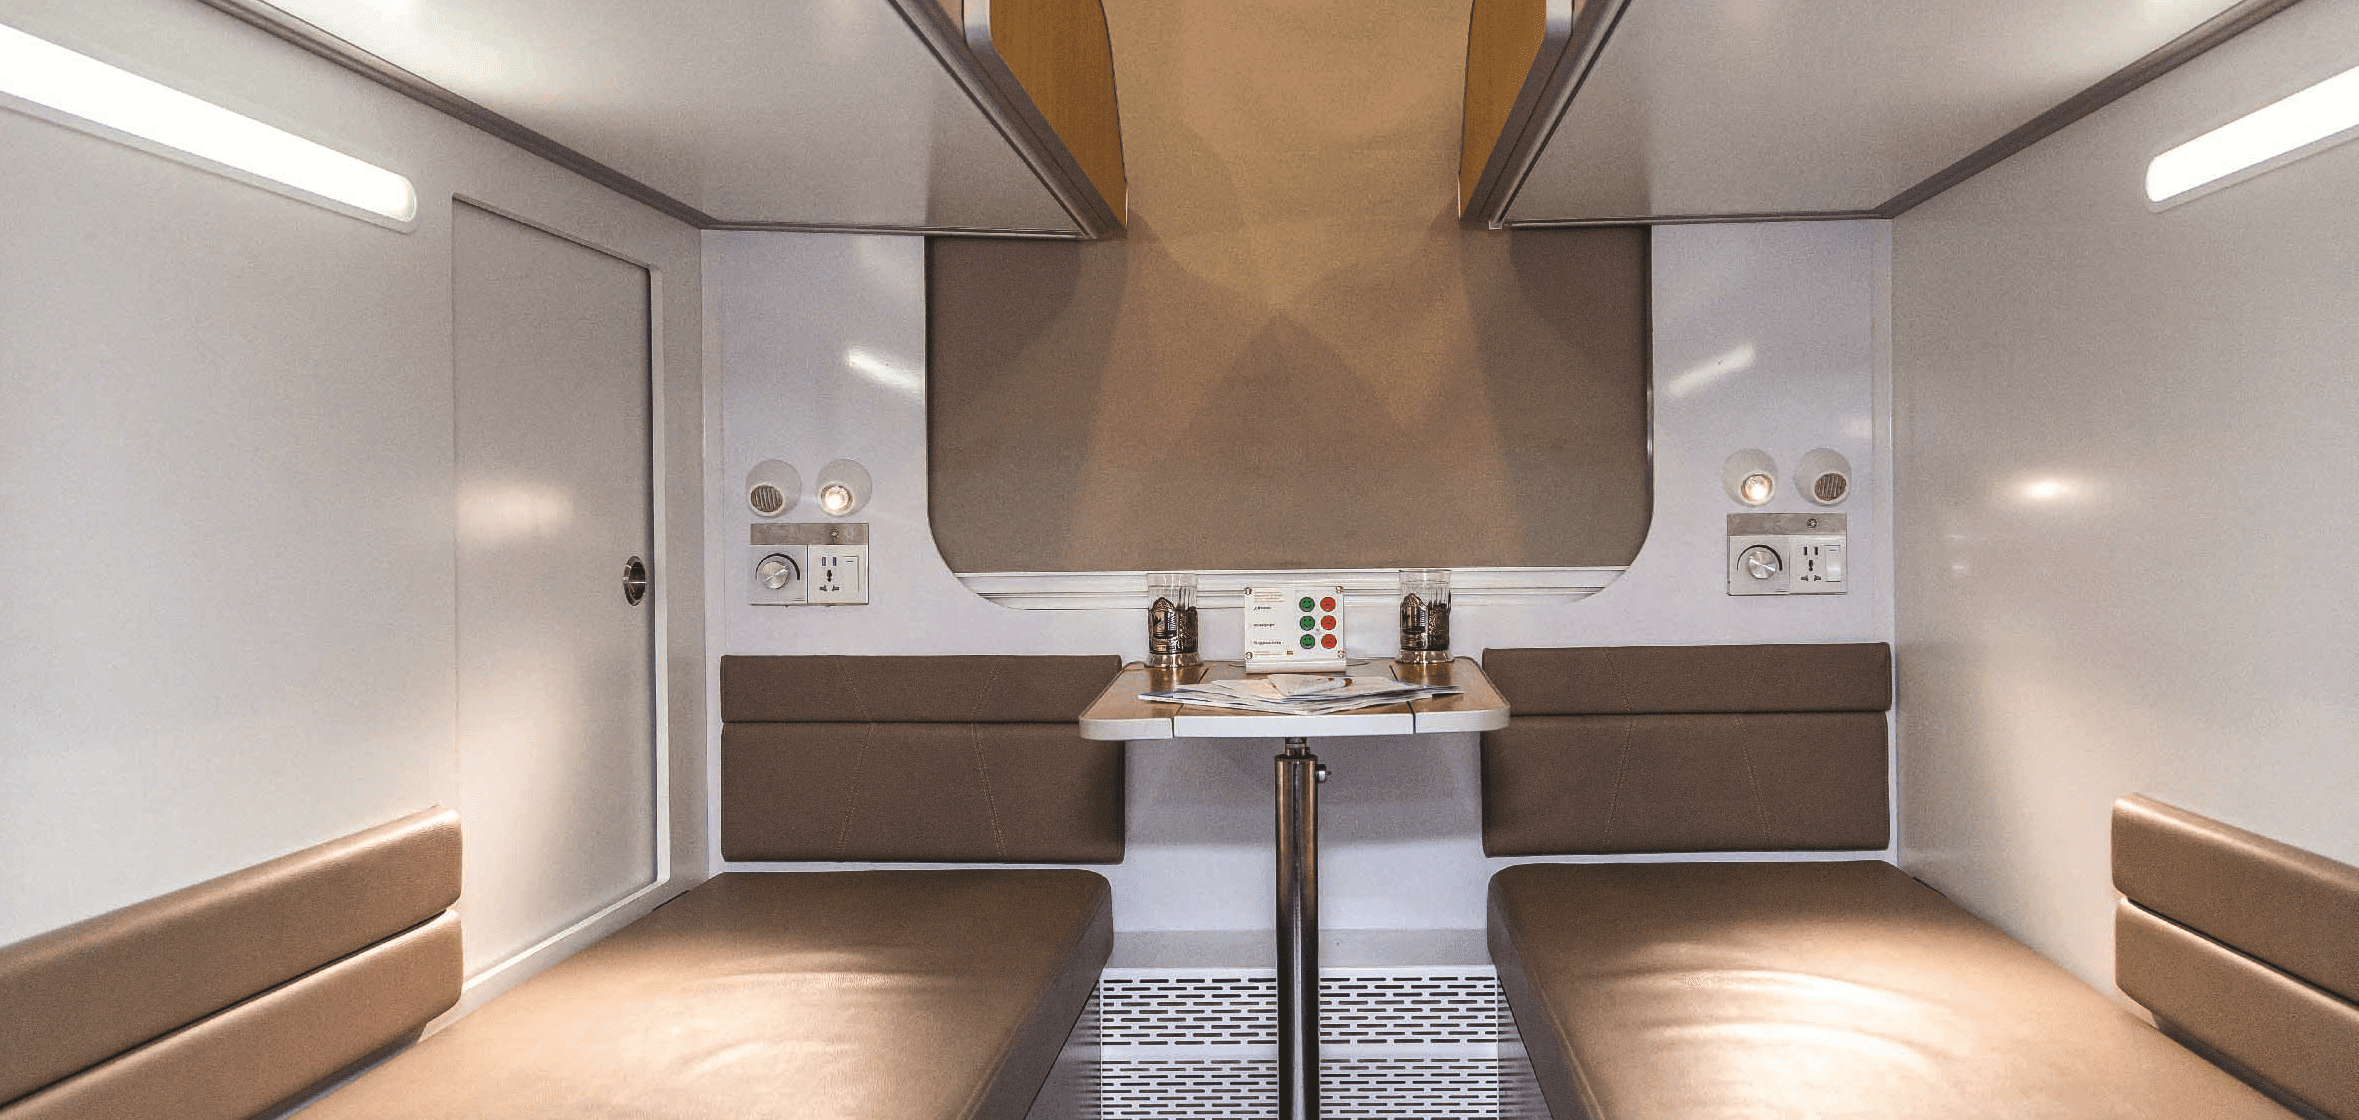 Upgrading the rolling stock in 2020–2025